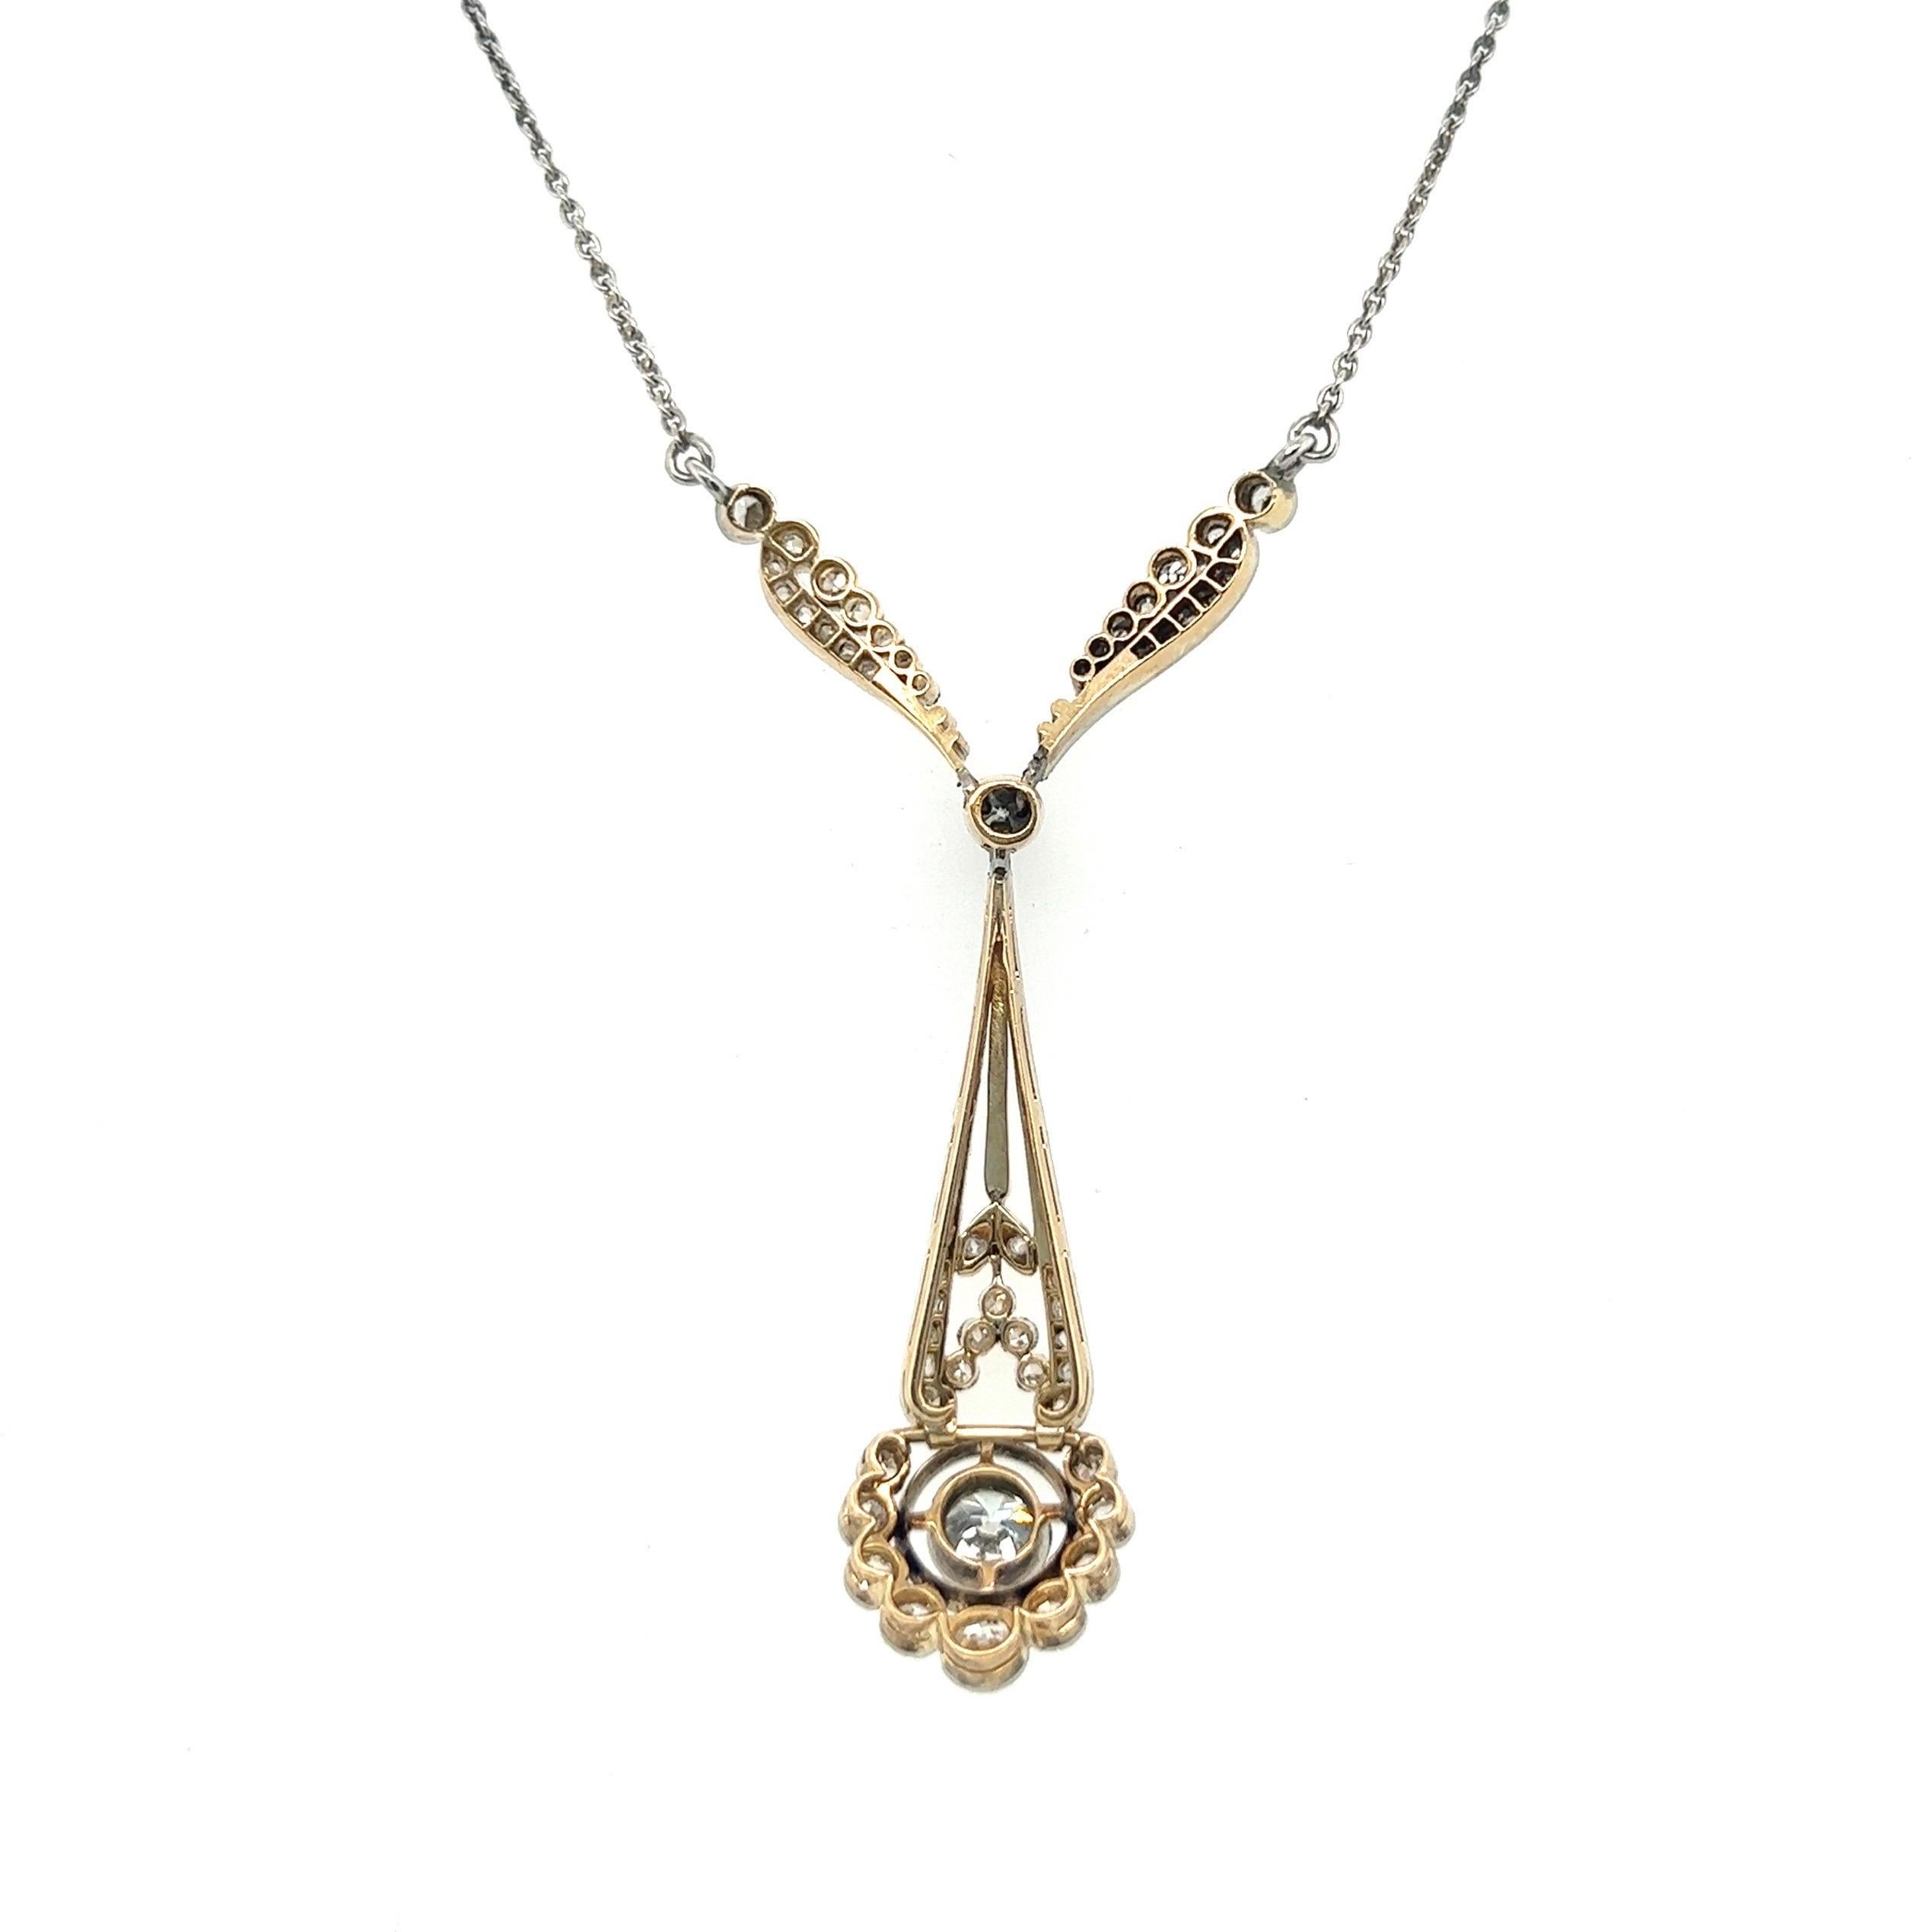 Elegant and feminine 18 karat yellow gold, platinum and diamond Belle Epoque/Edwardian necklace, circa 1900.

Consisting in a finely handcrafted Y-shaped pendant in platinum over 18 karat yellow gold and a fine anchor chain in platinum. The pendant